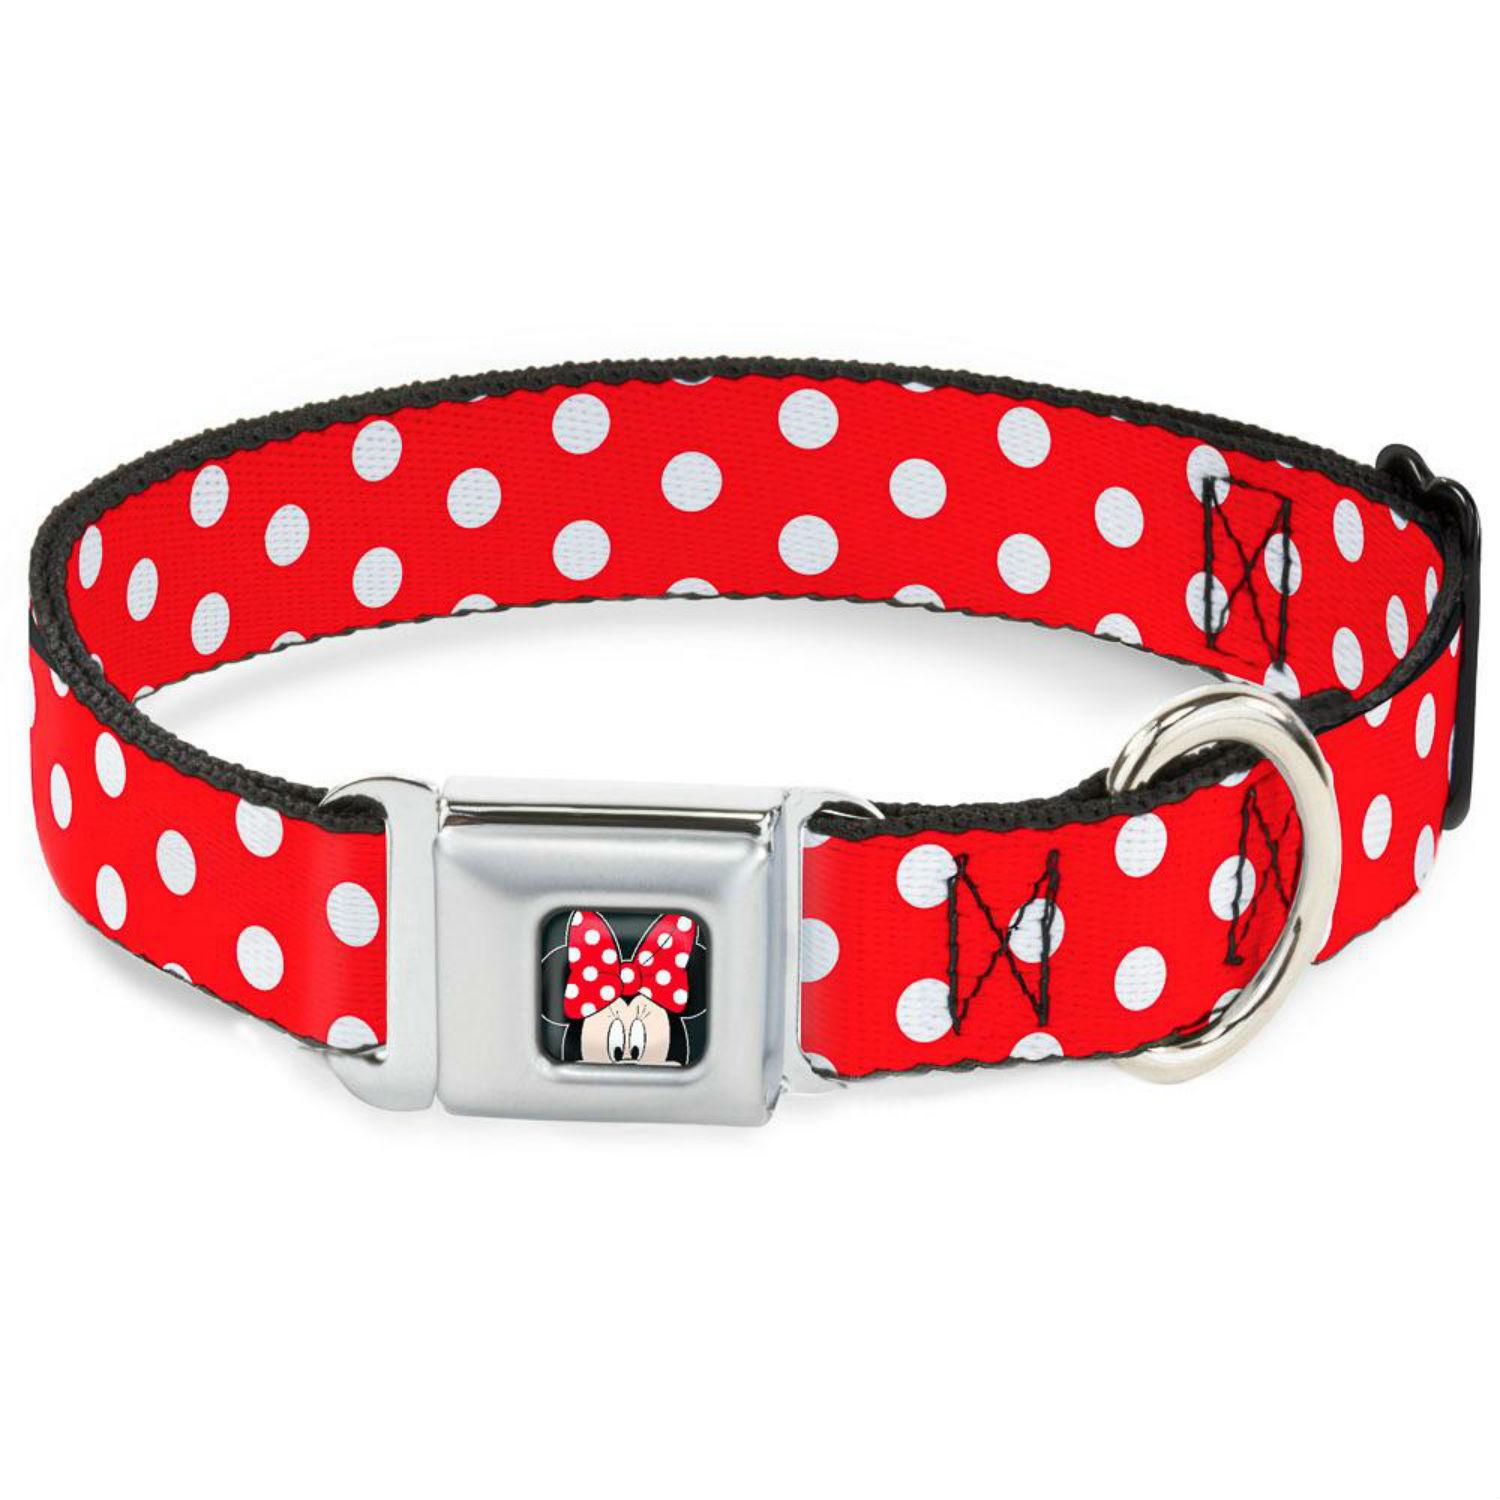 Minnie Mouse Seatbelt Buckle Dog Collar by Buckle-Down - Red/White